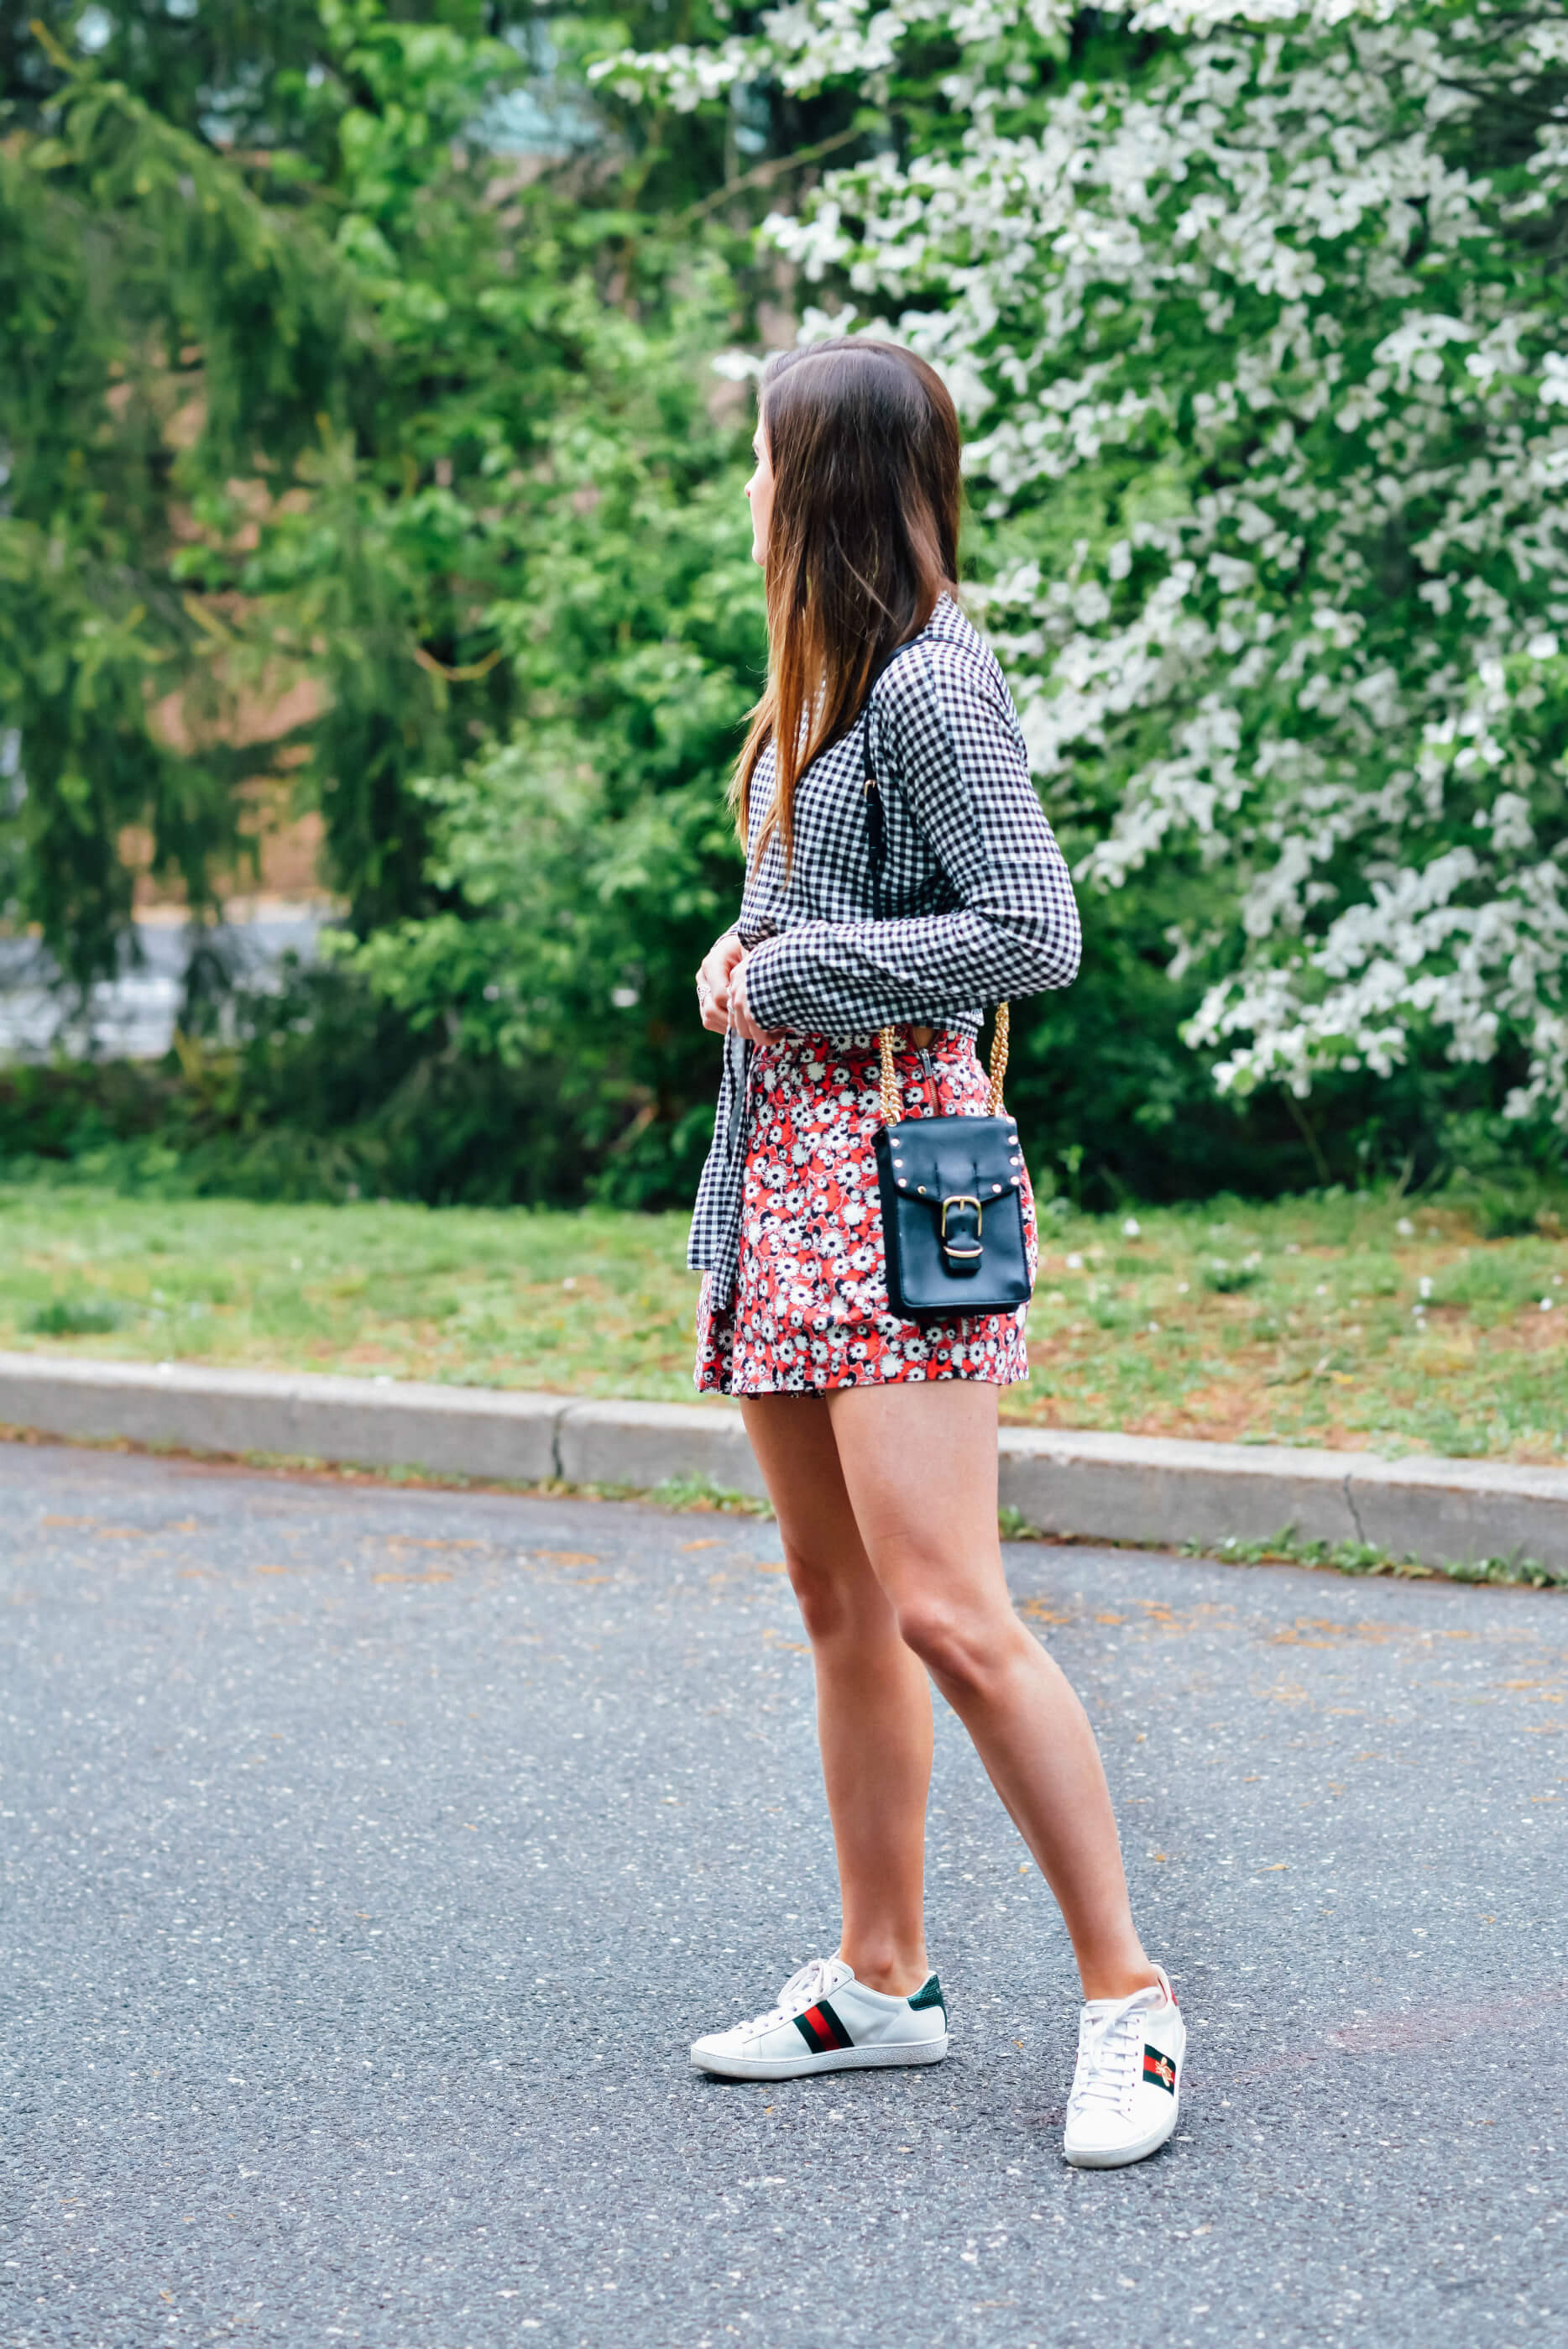 Gingham Top, Floral Print Skort Skirt, Gucci Ace Sneakers, Rebecca Minkoff Biker Bag, Memorial Day Outfit, Tilden of To Be Bright